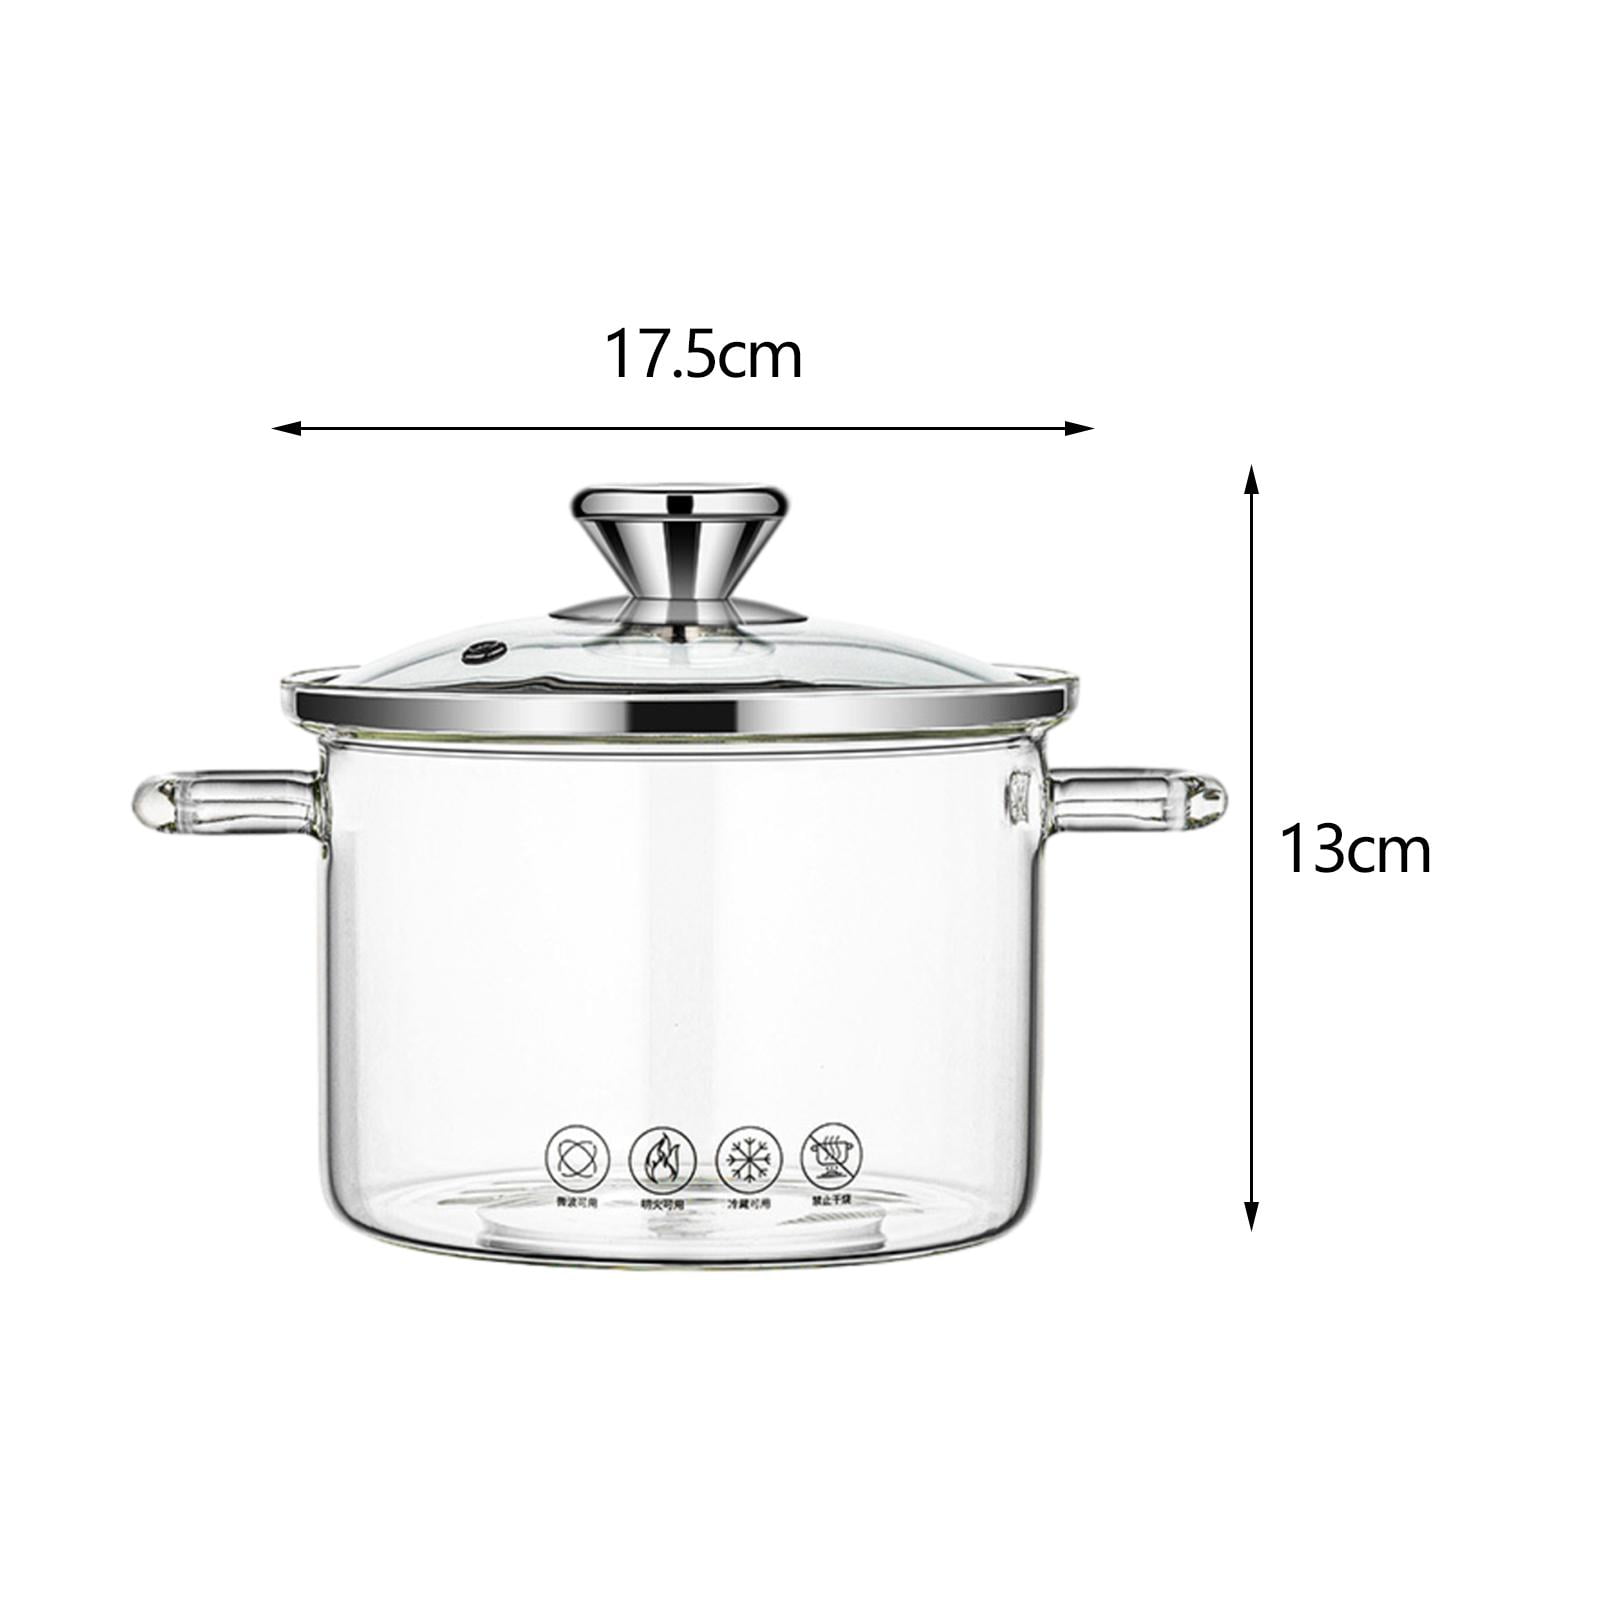 Heat-Resistant Glass Saucepan, Transparent Borosilicate Stovetop Cooking Pot with Lid and Handle Nonstick Sauce Pot for Noodles Chocolate Stockpots